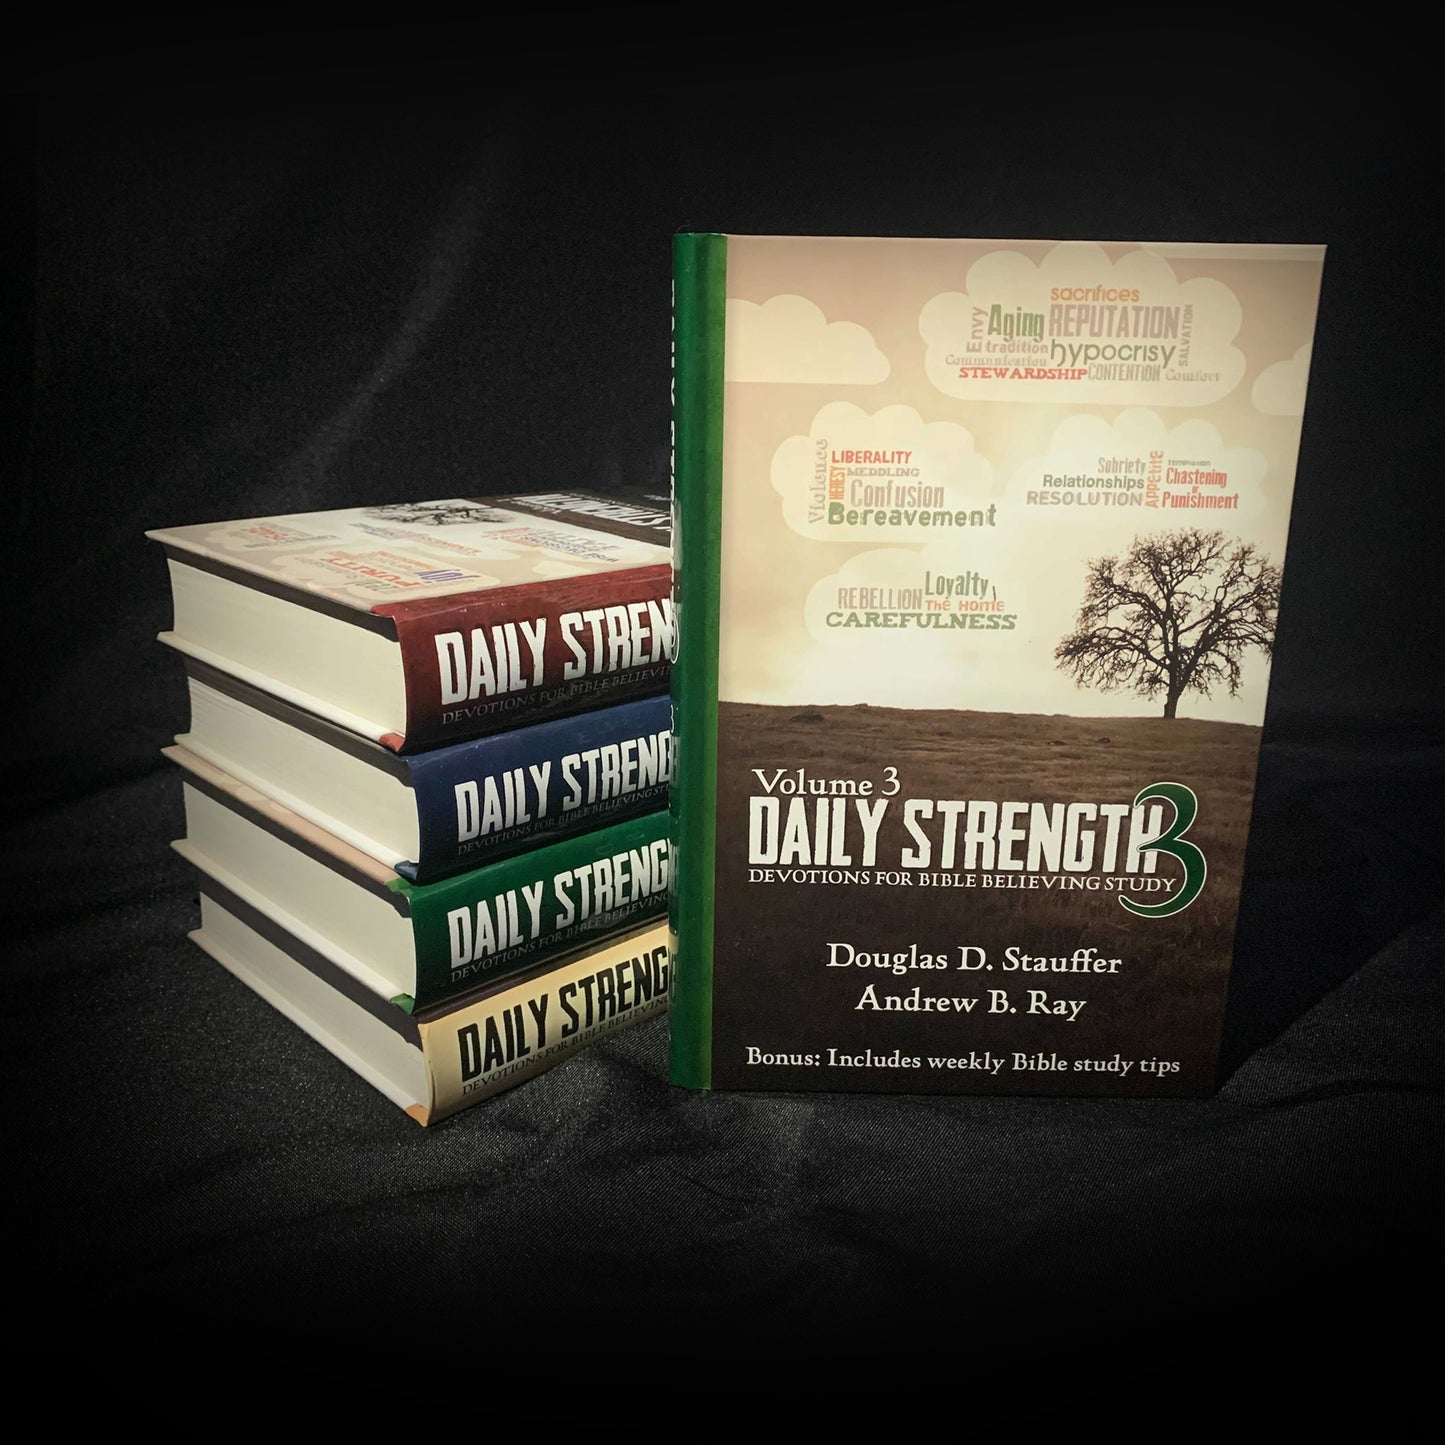 Daily Strength v. 3: Devotions for Bible Believing Study